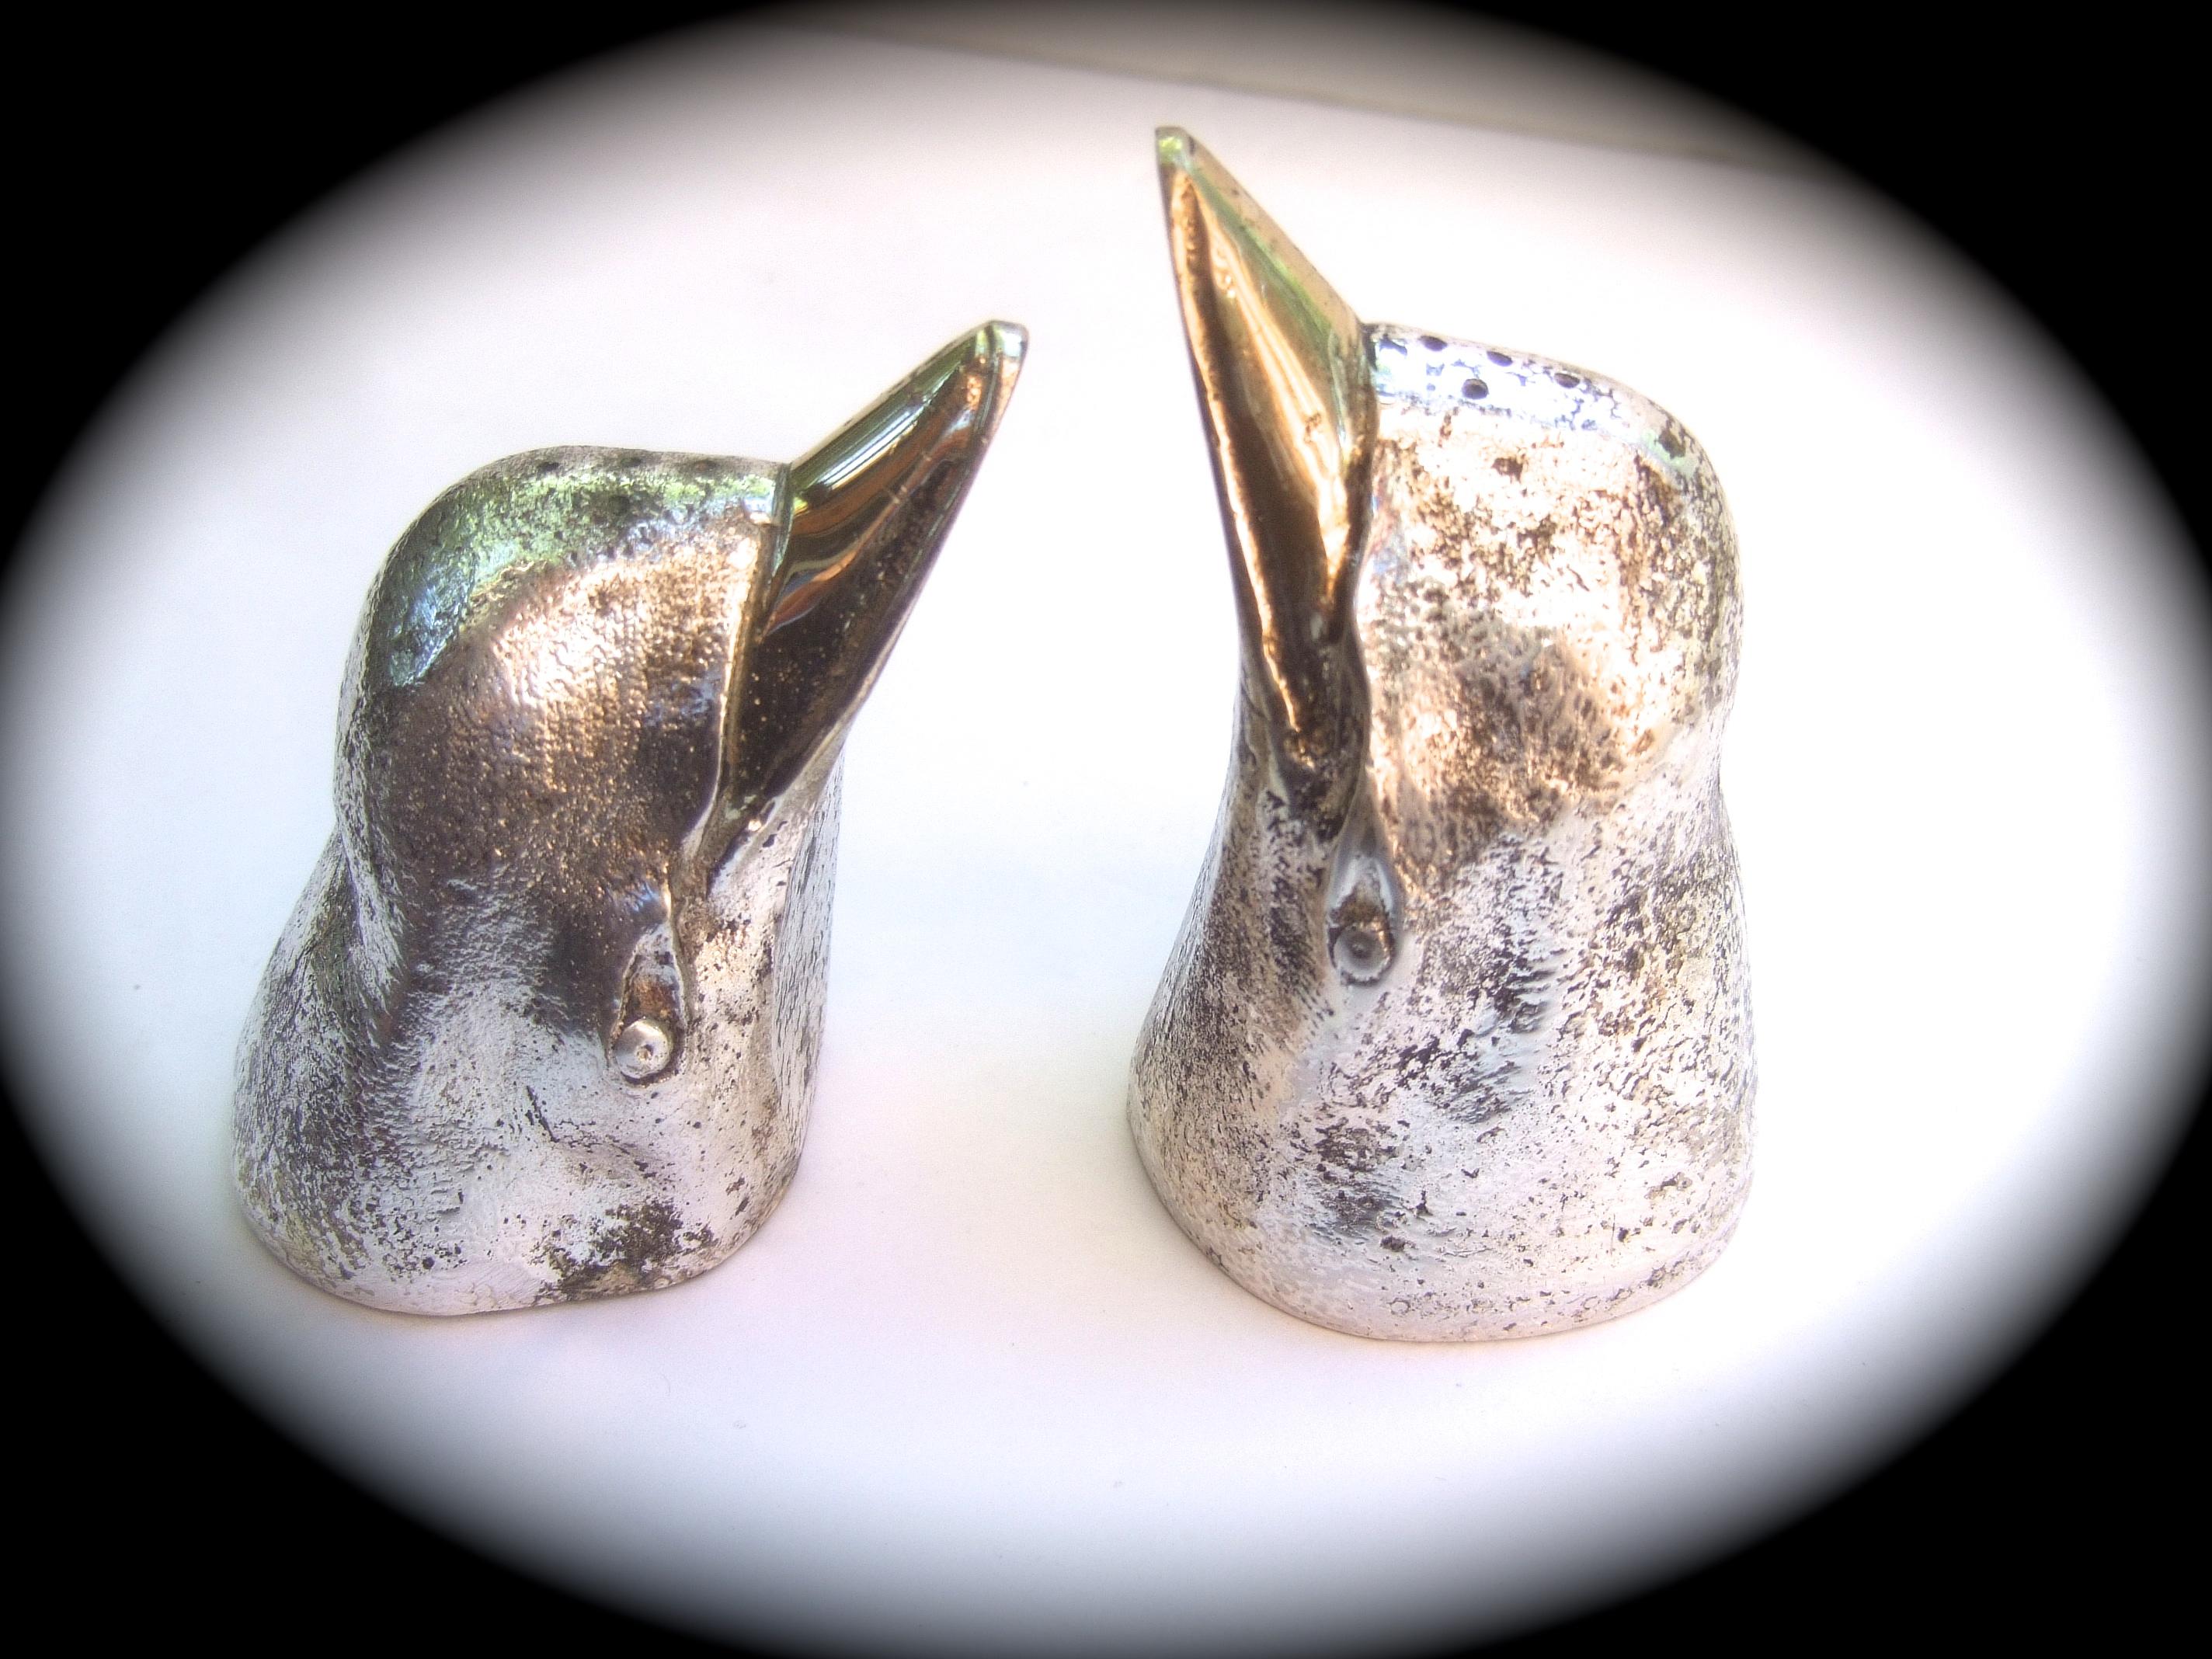 Gucci Italy Silver & gilt metal penguin salt & pepper shakers c 1970s

The unique pair of figural penguin spice shakers are designed with smooth gilt metal bills; in contrast their heads are sheathed in silver-tone satin metal that is textured with